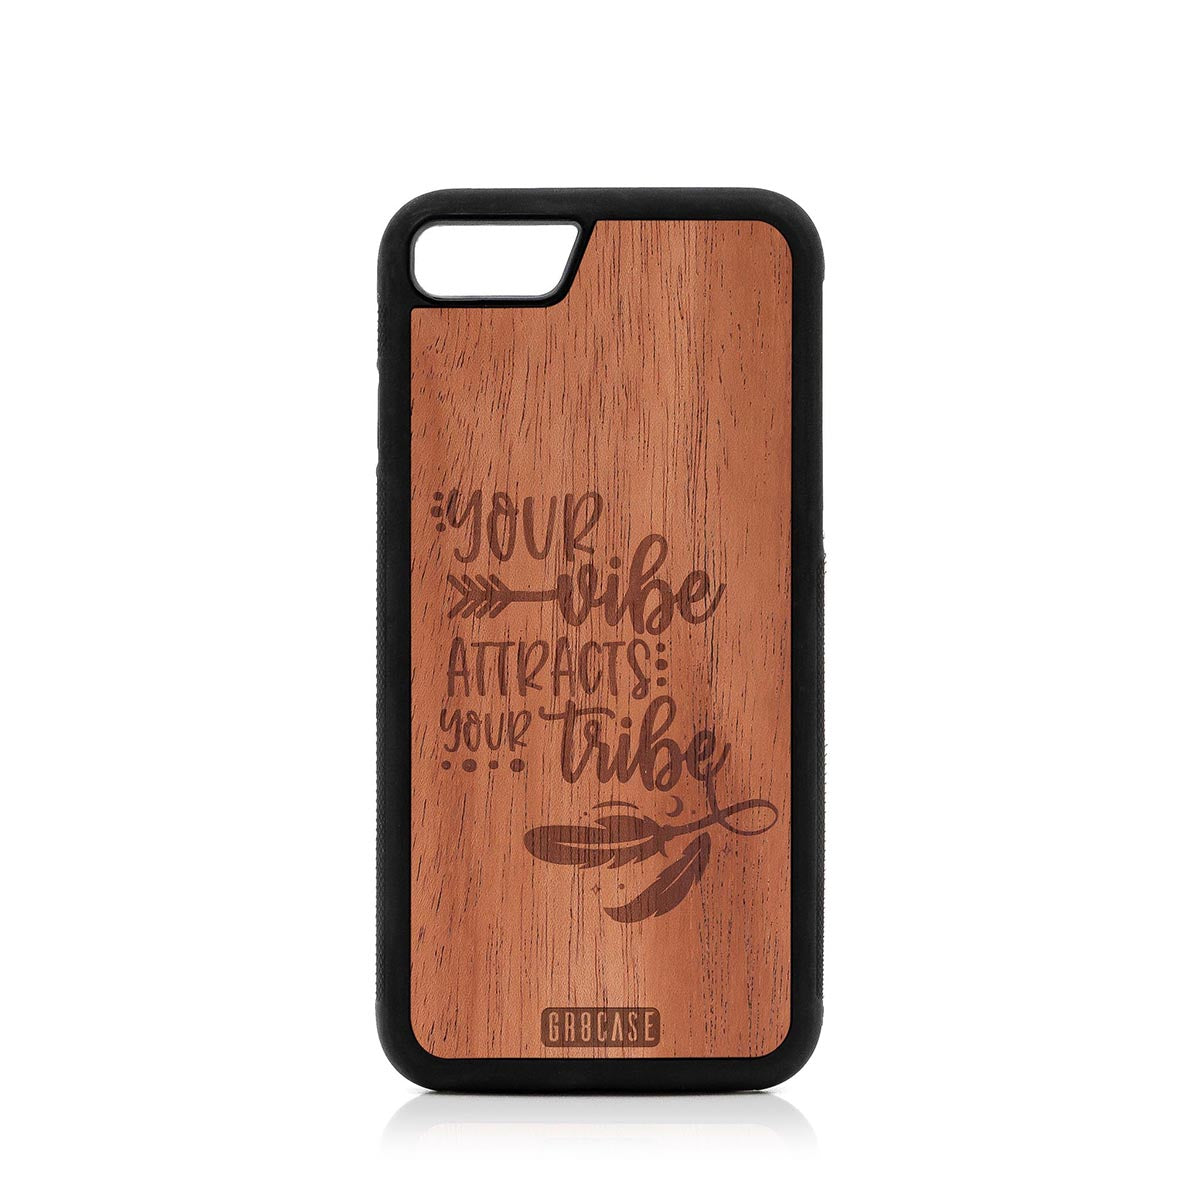 Your Vibe Attracts Your Tribe Design Wood Case For iPhone 7/8